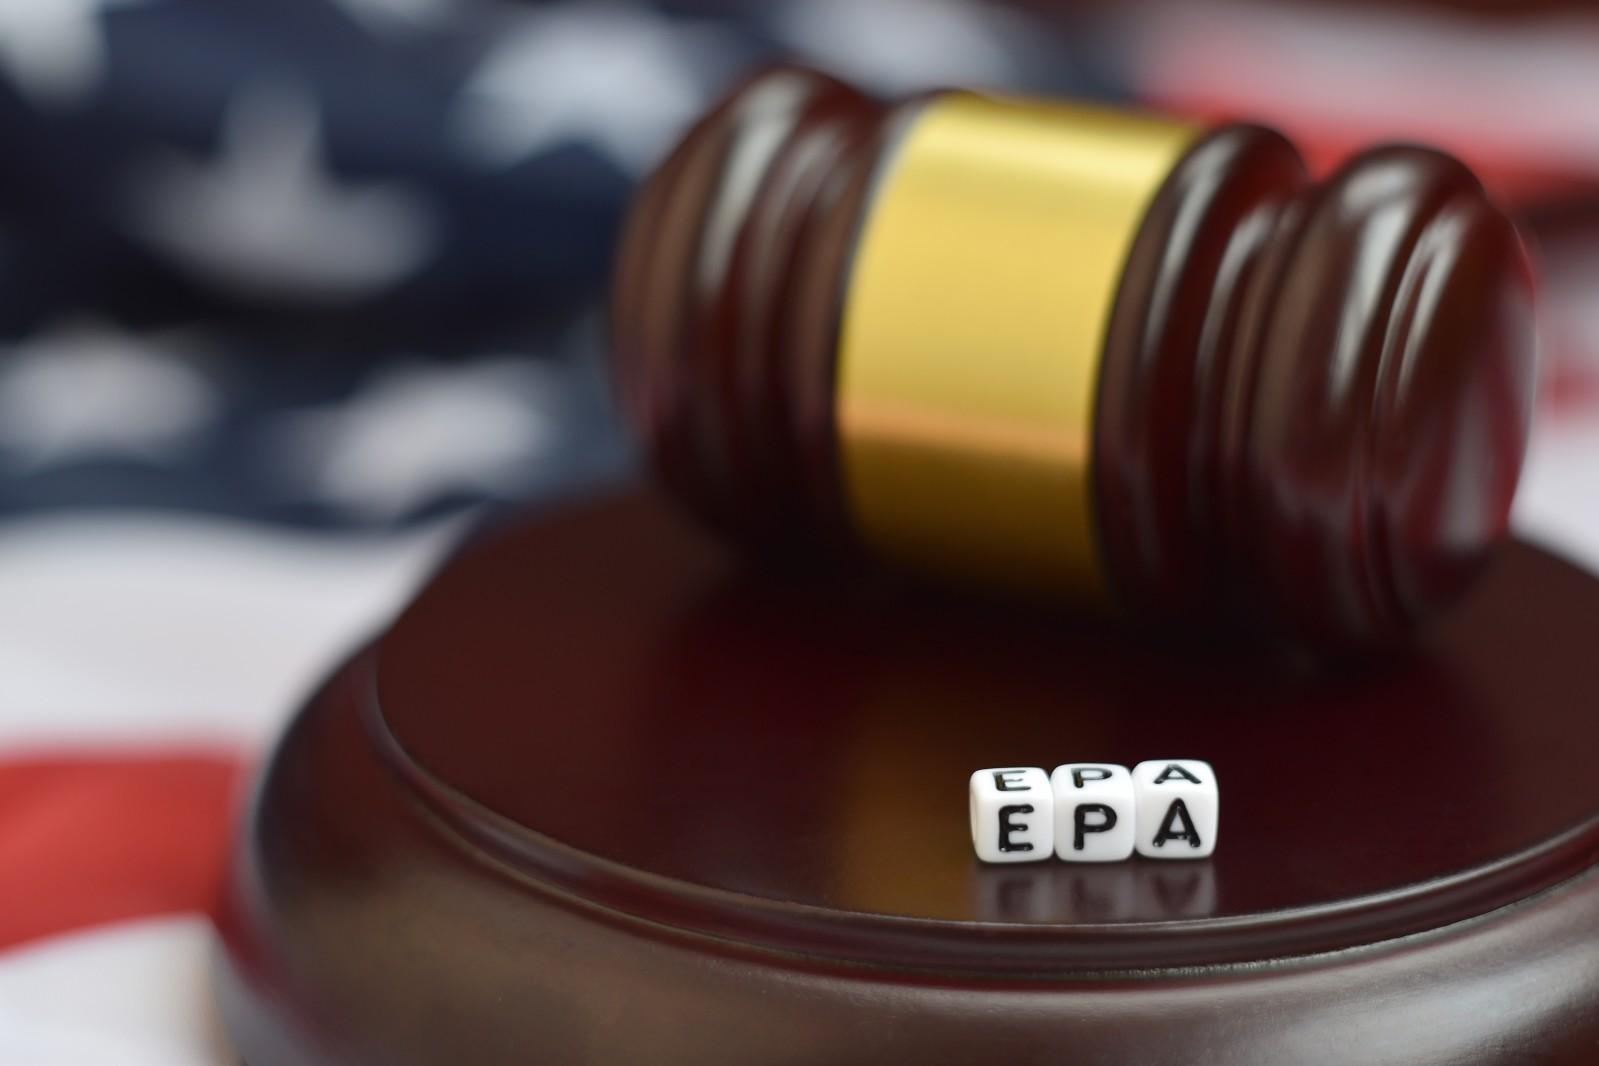 Motorsports enthusiasts are fighting against EPA legislation, and trying to pass the Recognition for the Protection of Motorsports Act.